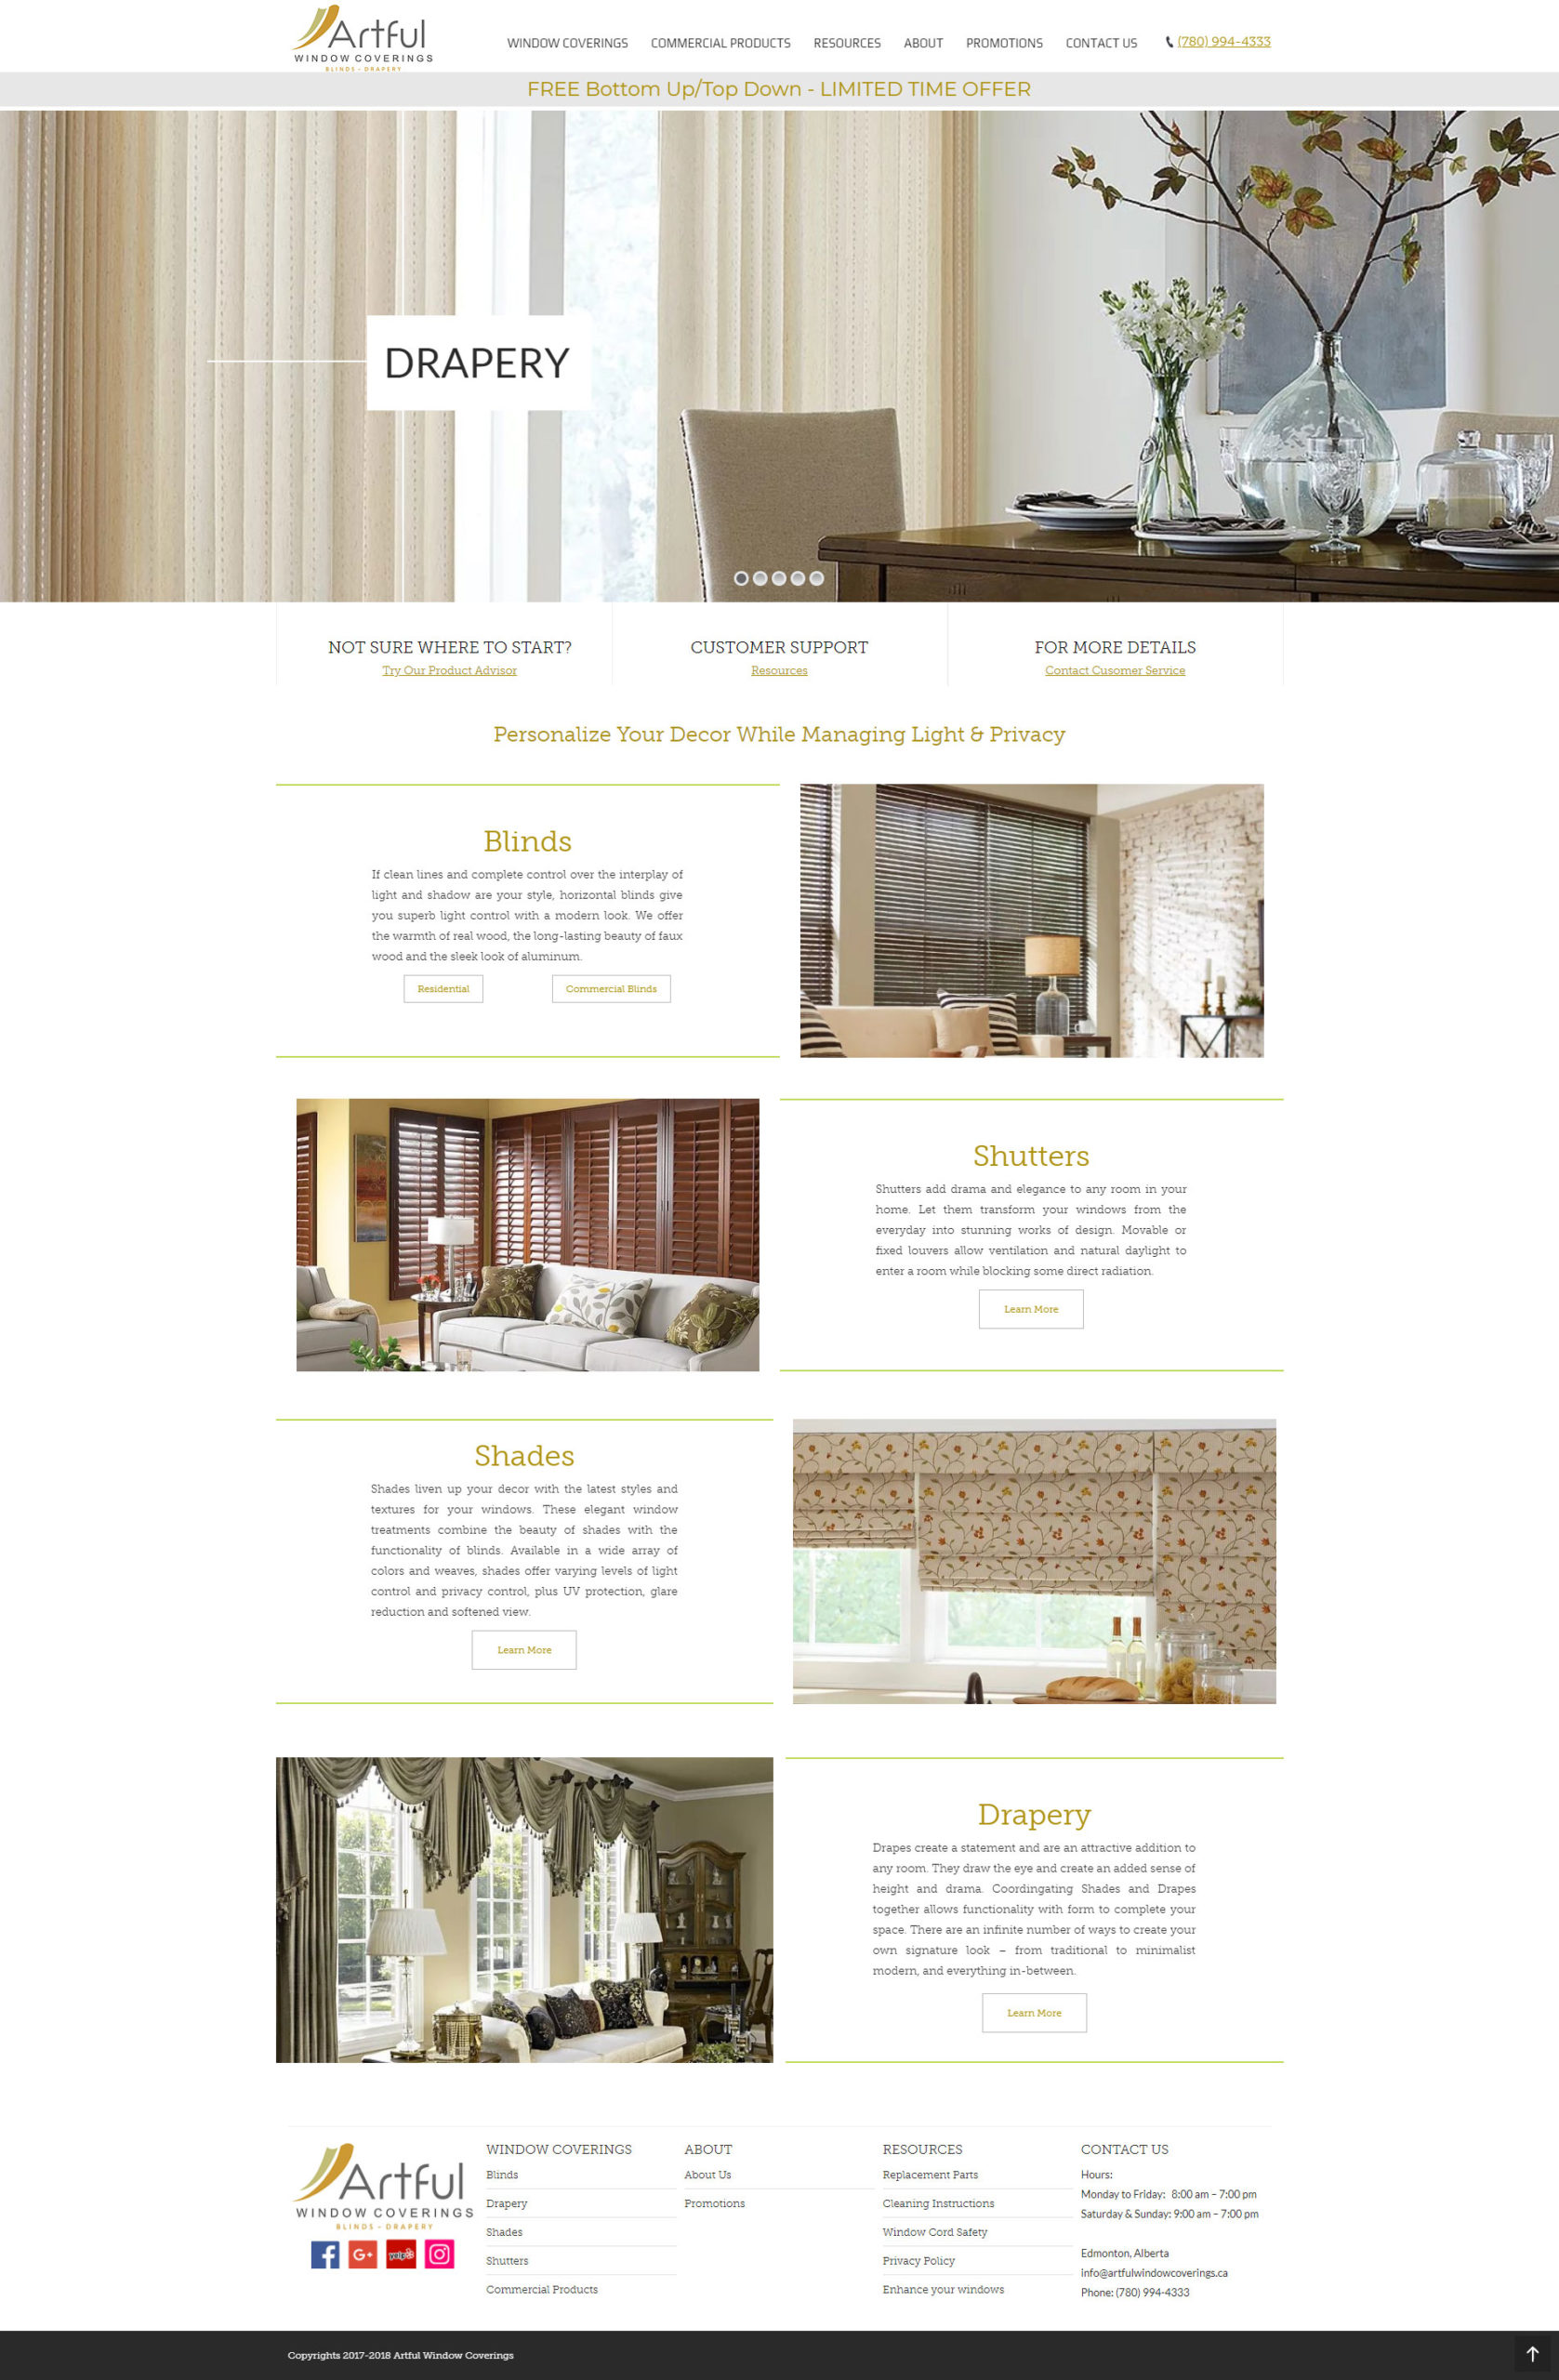 Commercial Window Covering Website Design4